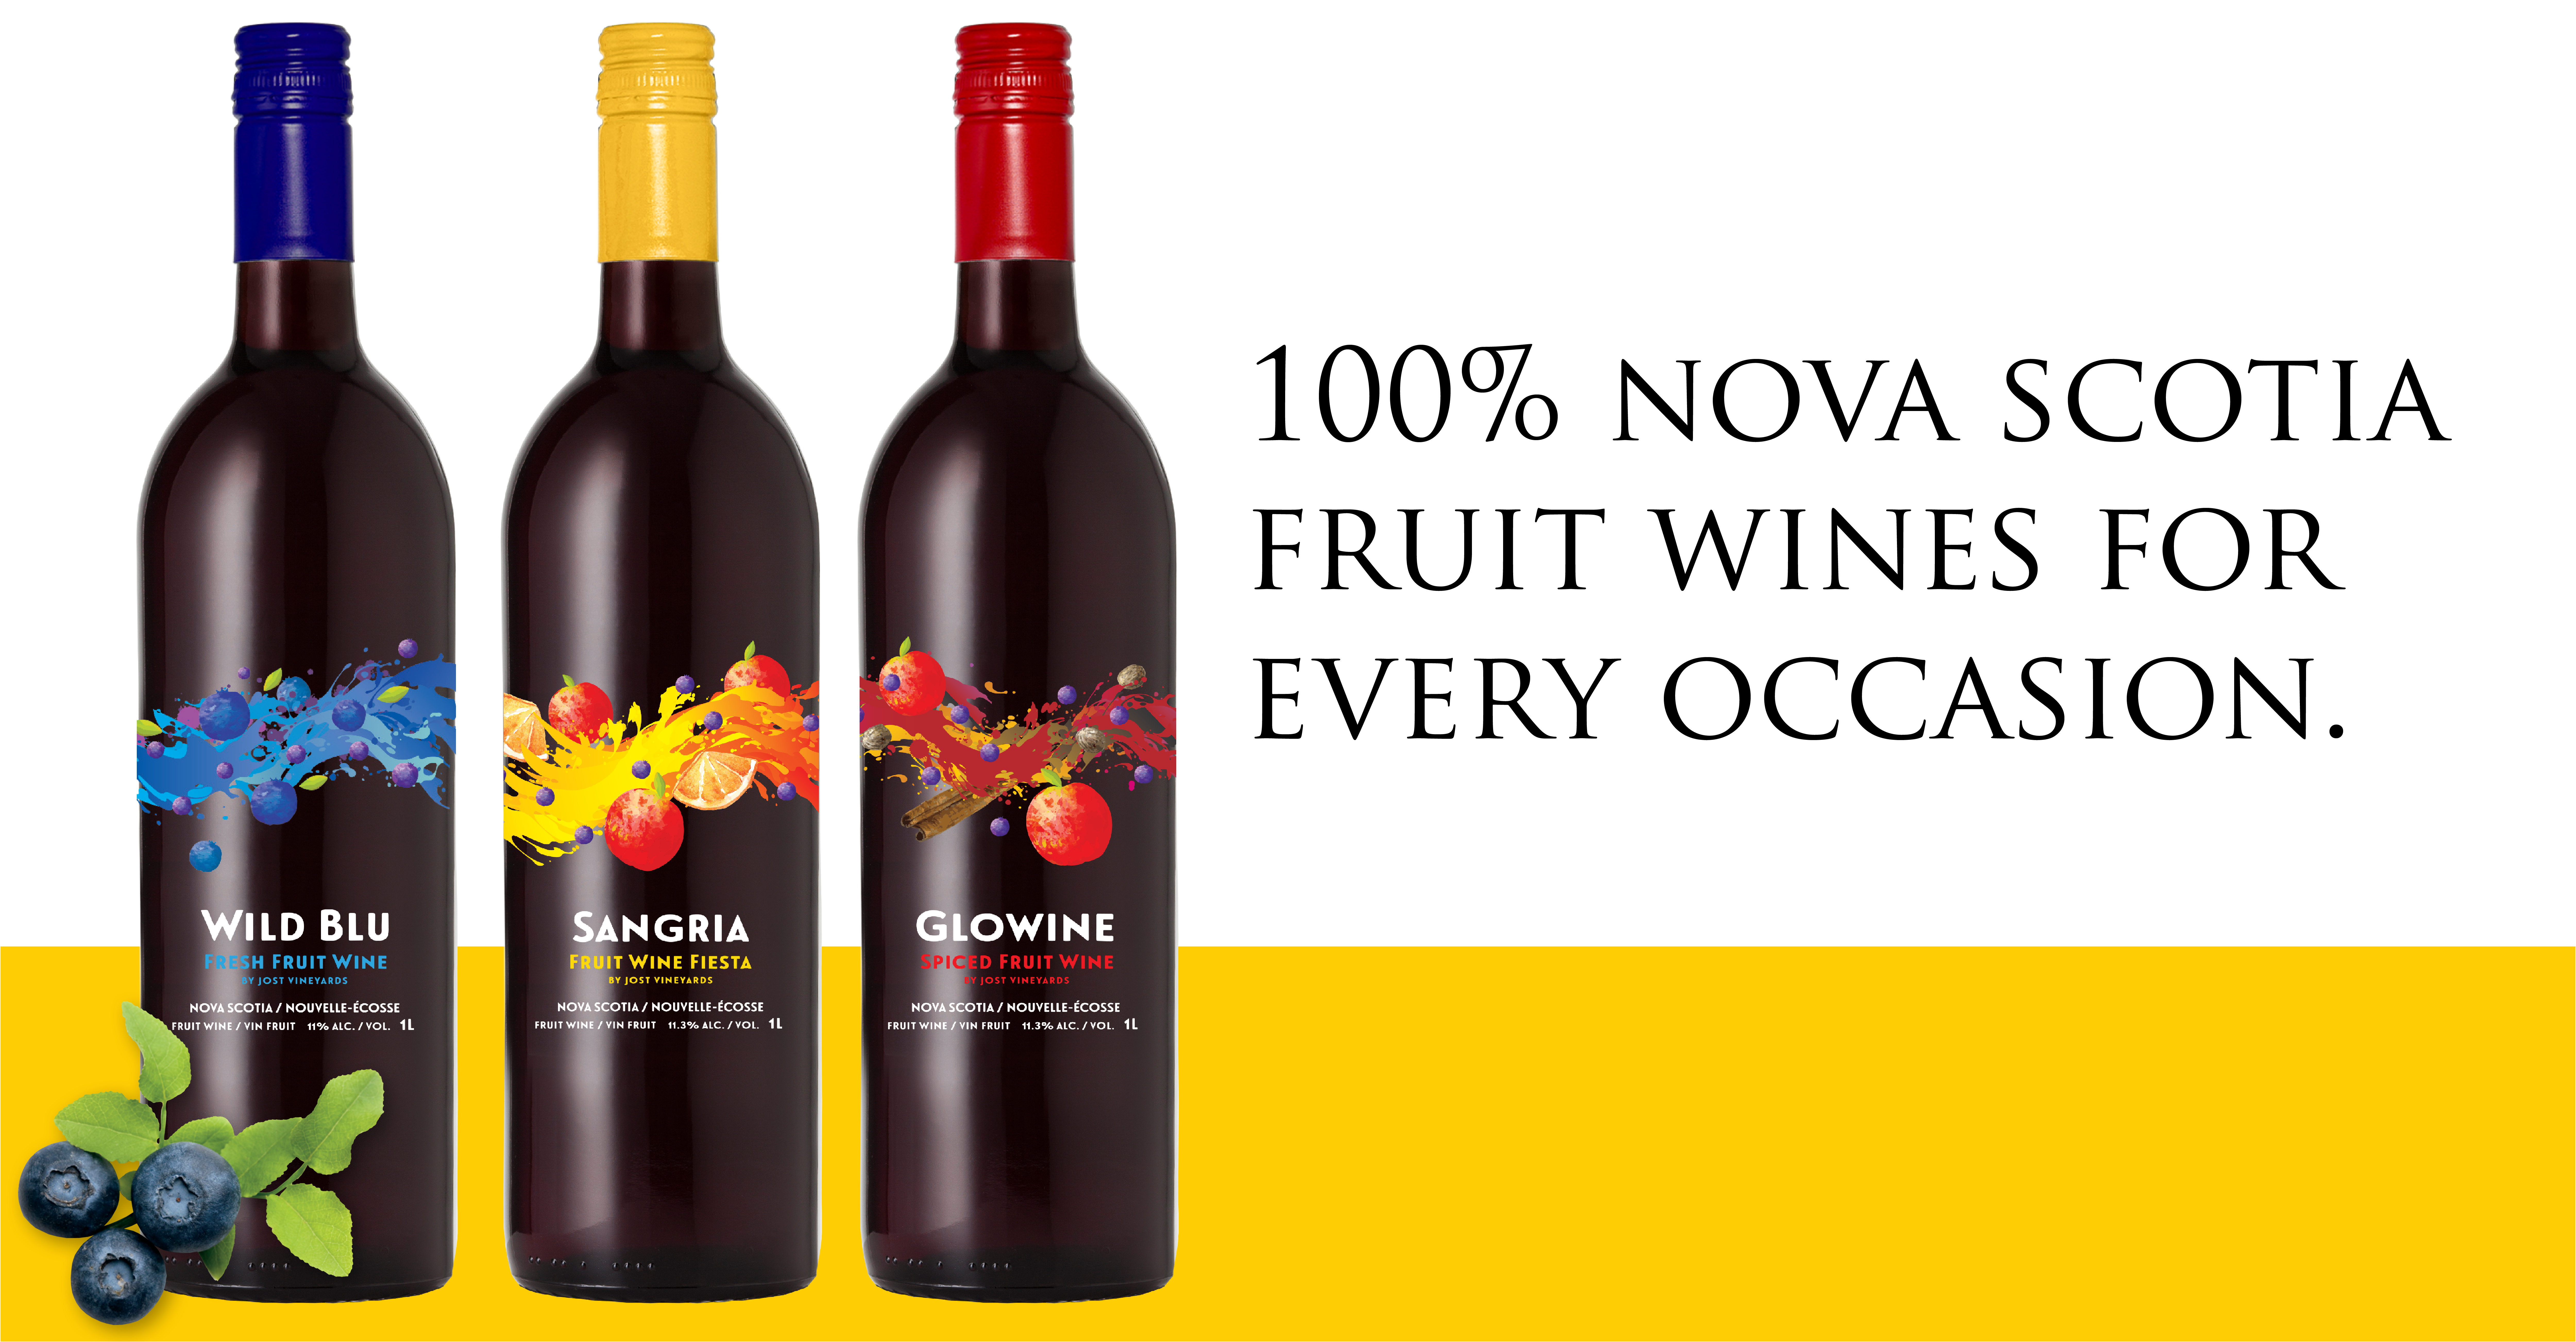 The newest addition to our specialty fruit wines | Devonian Coast ...